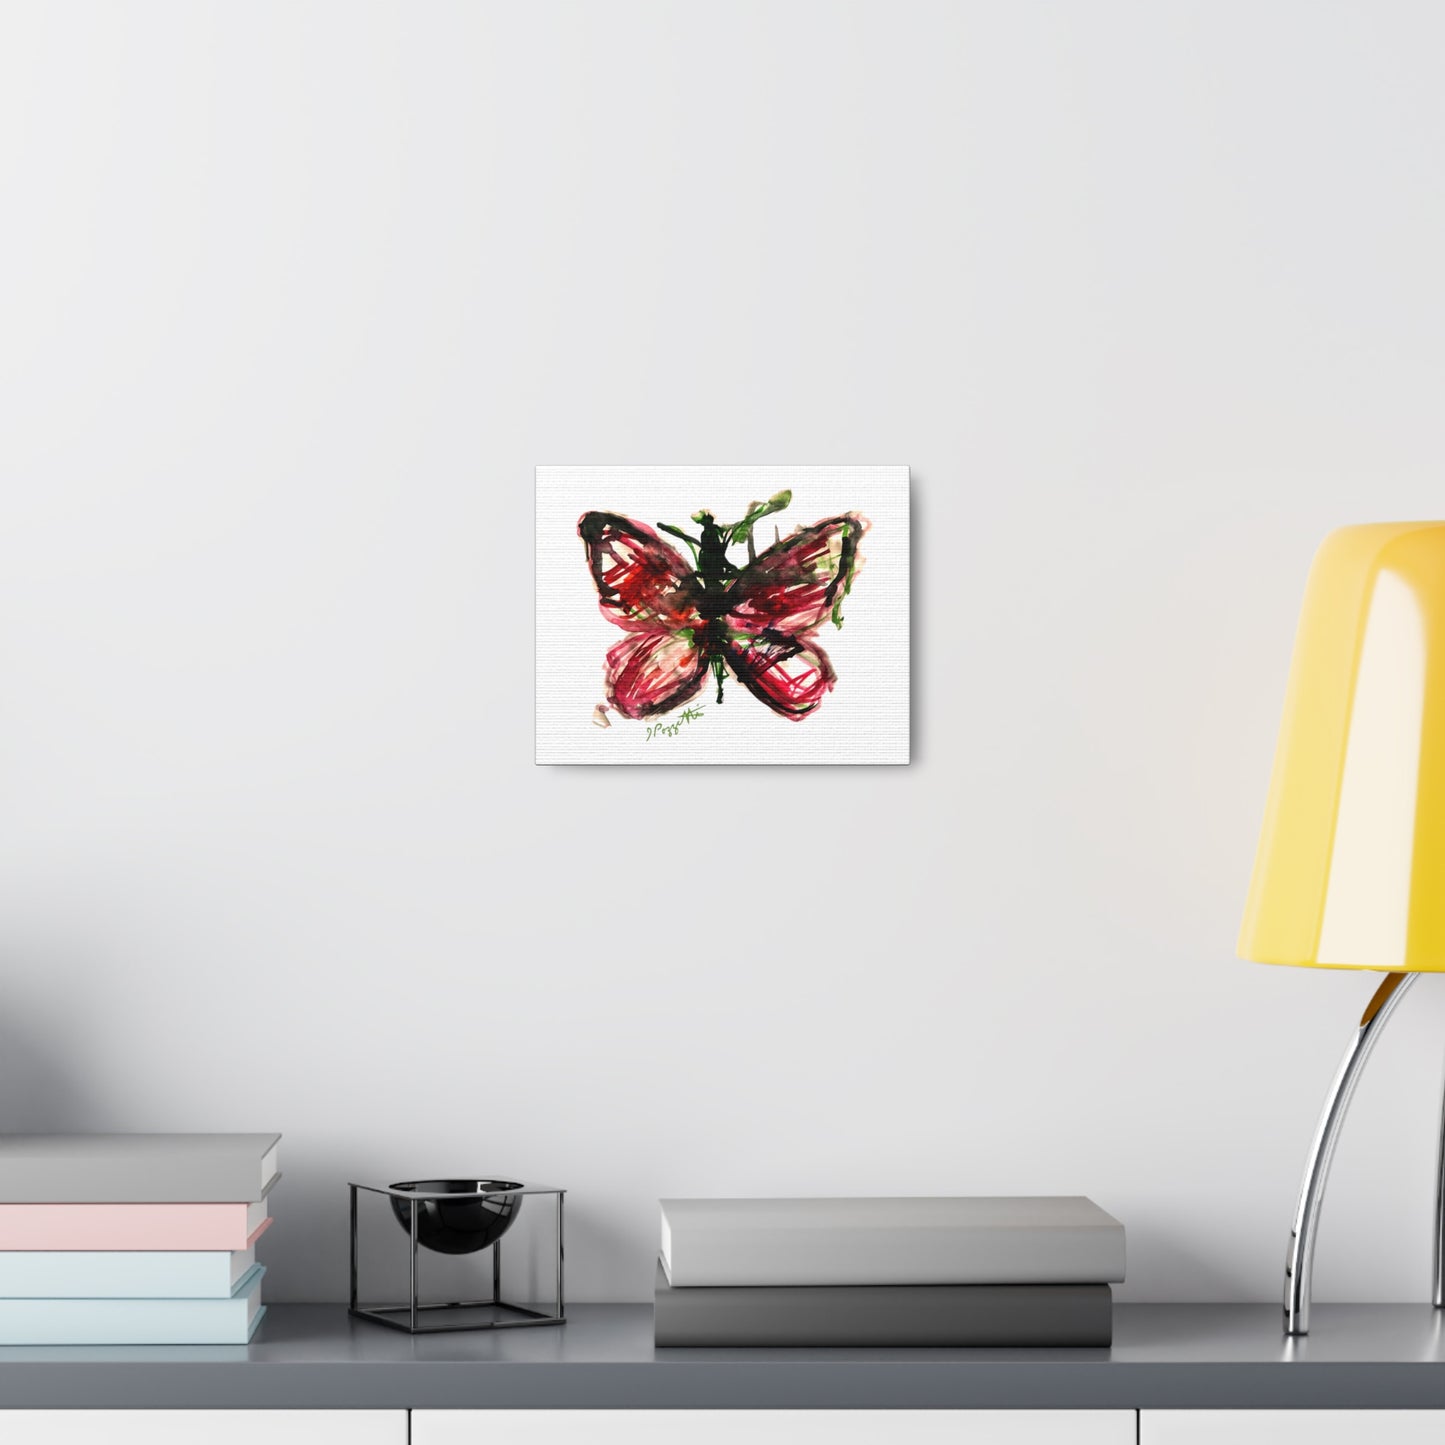 Watercolor Style Butterfly Canvas Art